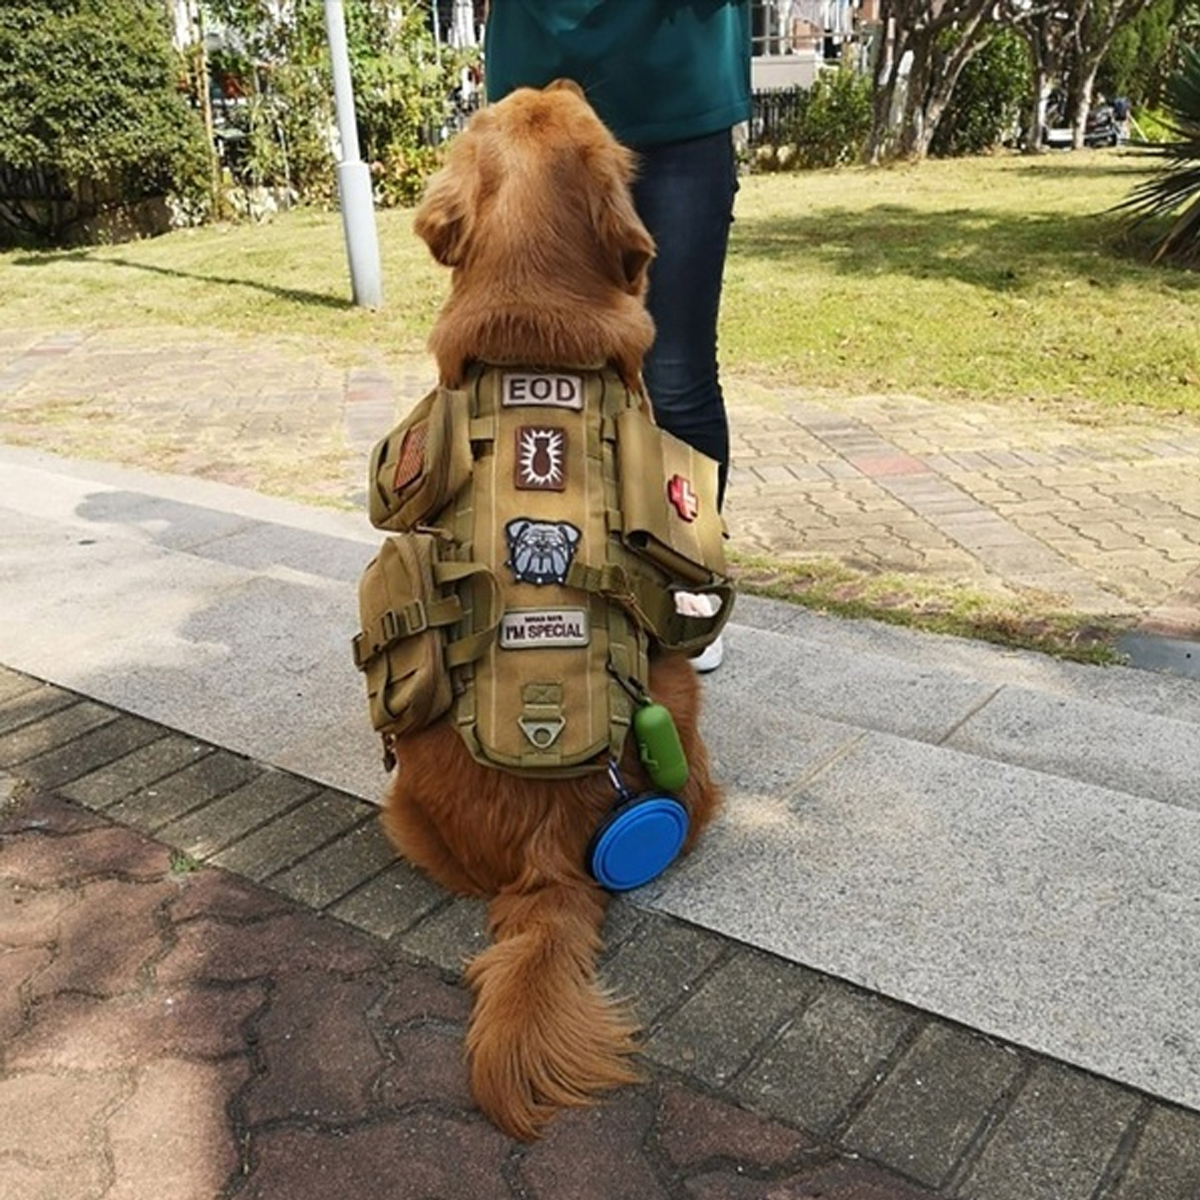 600D-Nylon-Tactical-Dog-Vests-Military-Dog-Clothes-with-Storage-Bag-Training-Load-Bearing-Harness-1817367-9